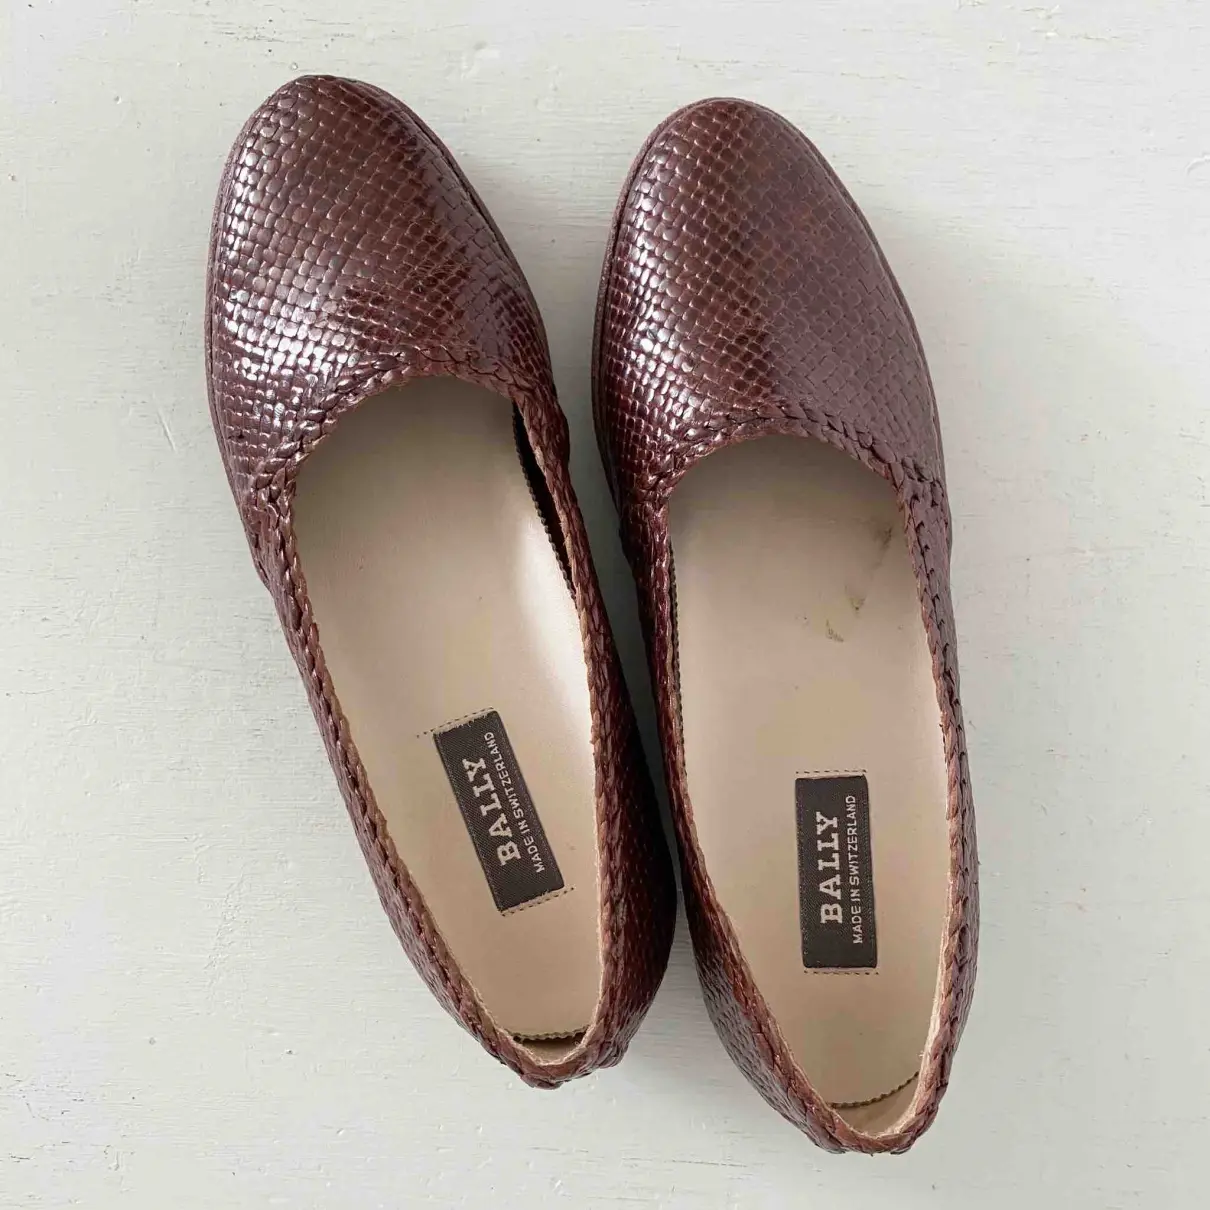 Leather flats Bally - Vintage